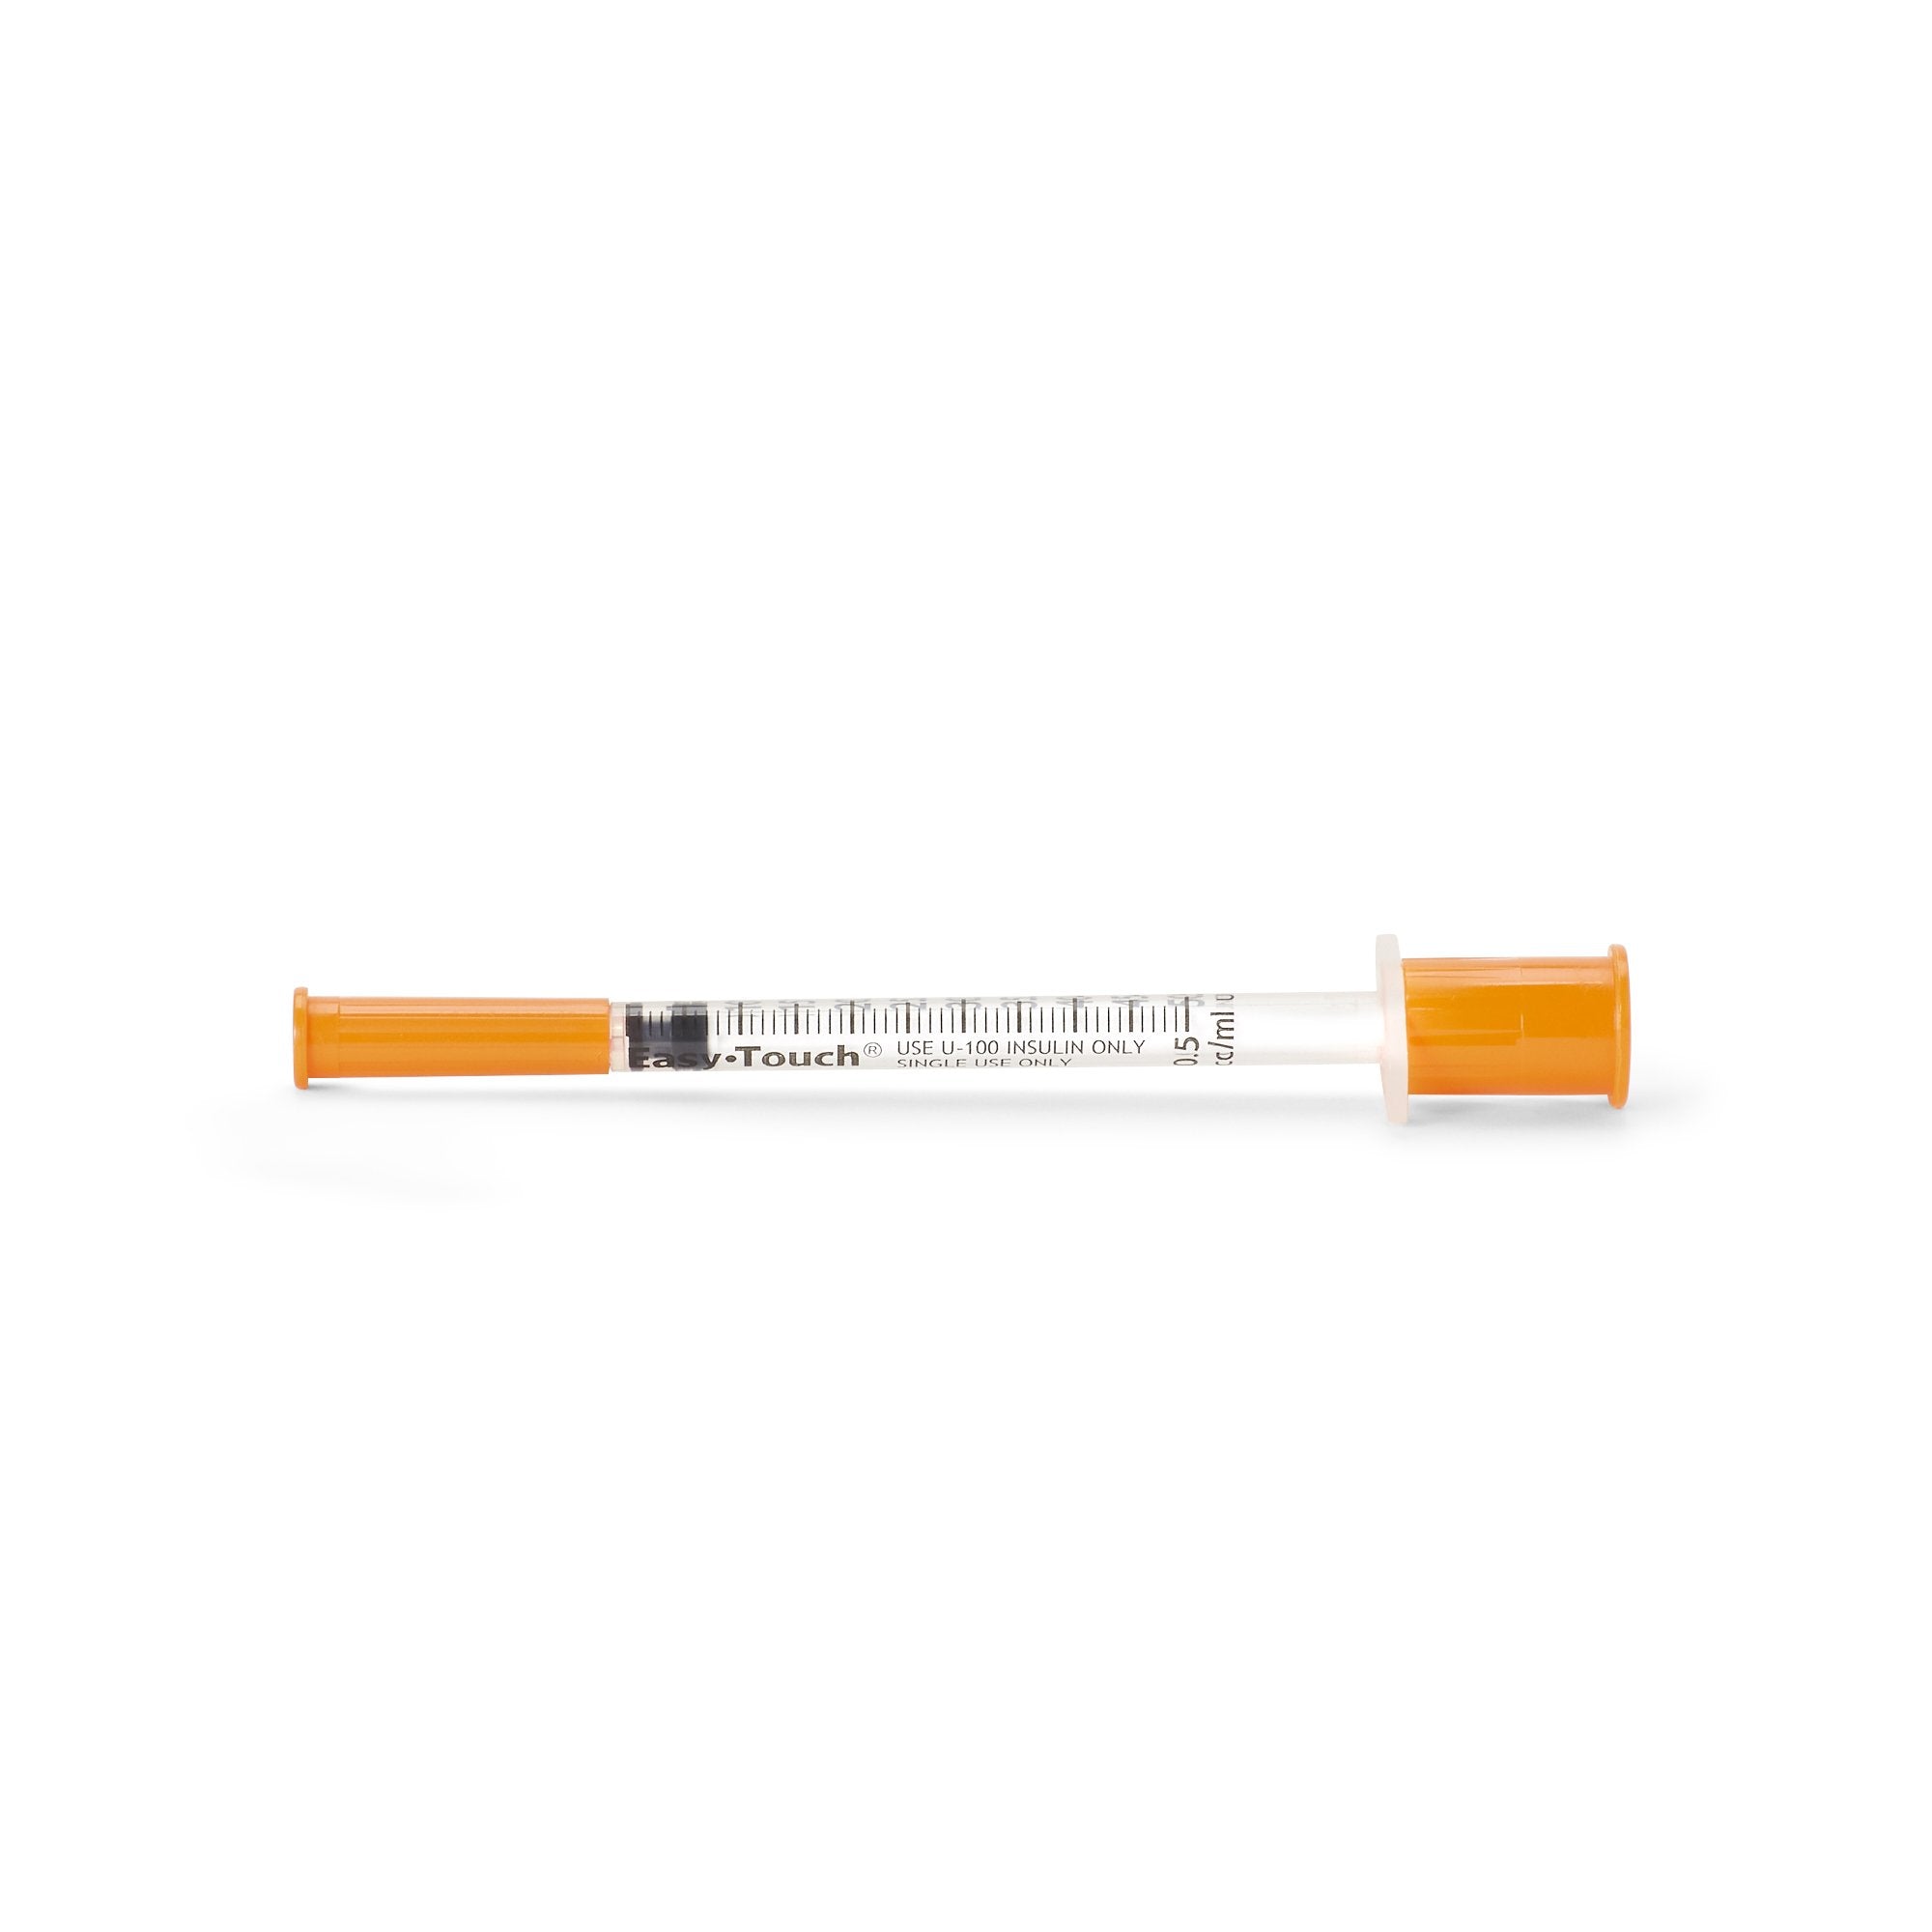 Standard Insulin Syringe with Needle EasyTouch 0.5 mL 5/16 Inch 31 Gauge NonSafety Thin Wall